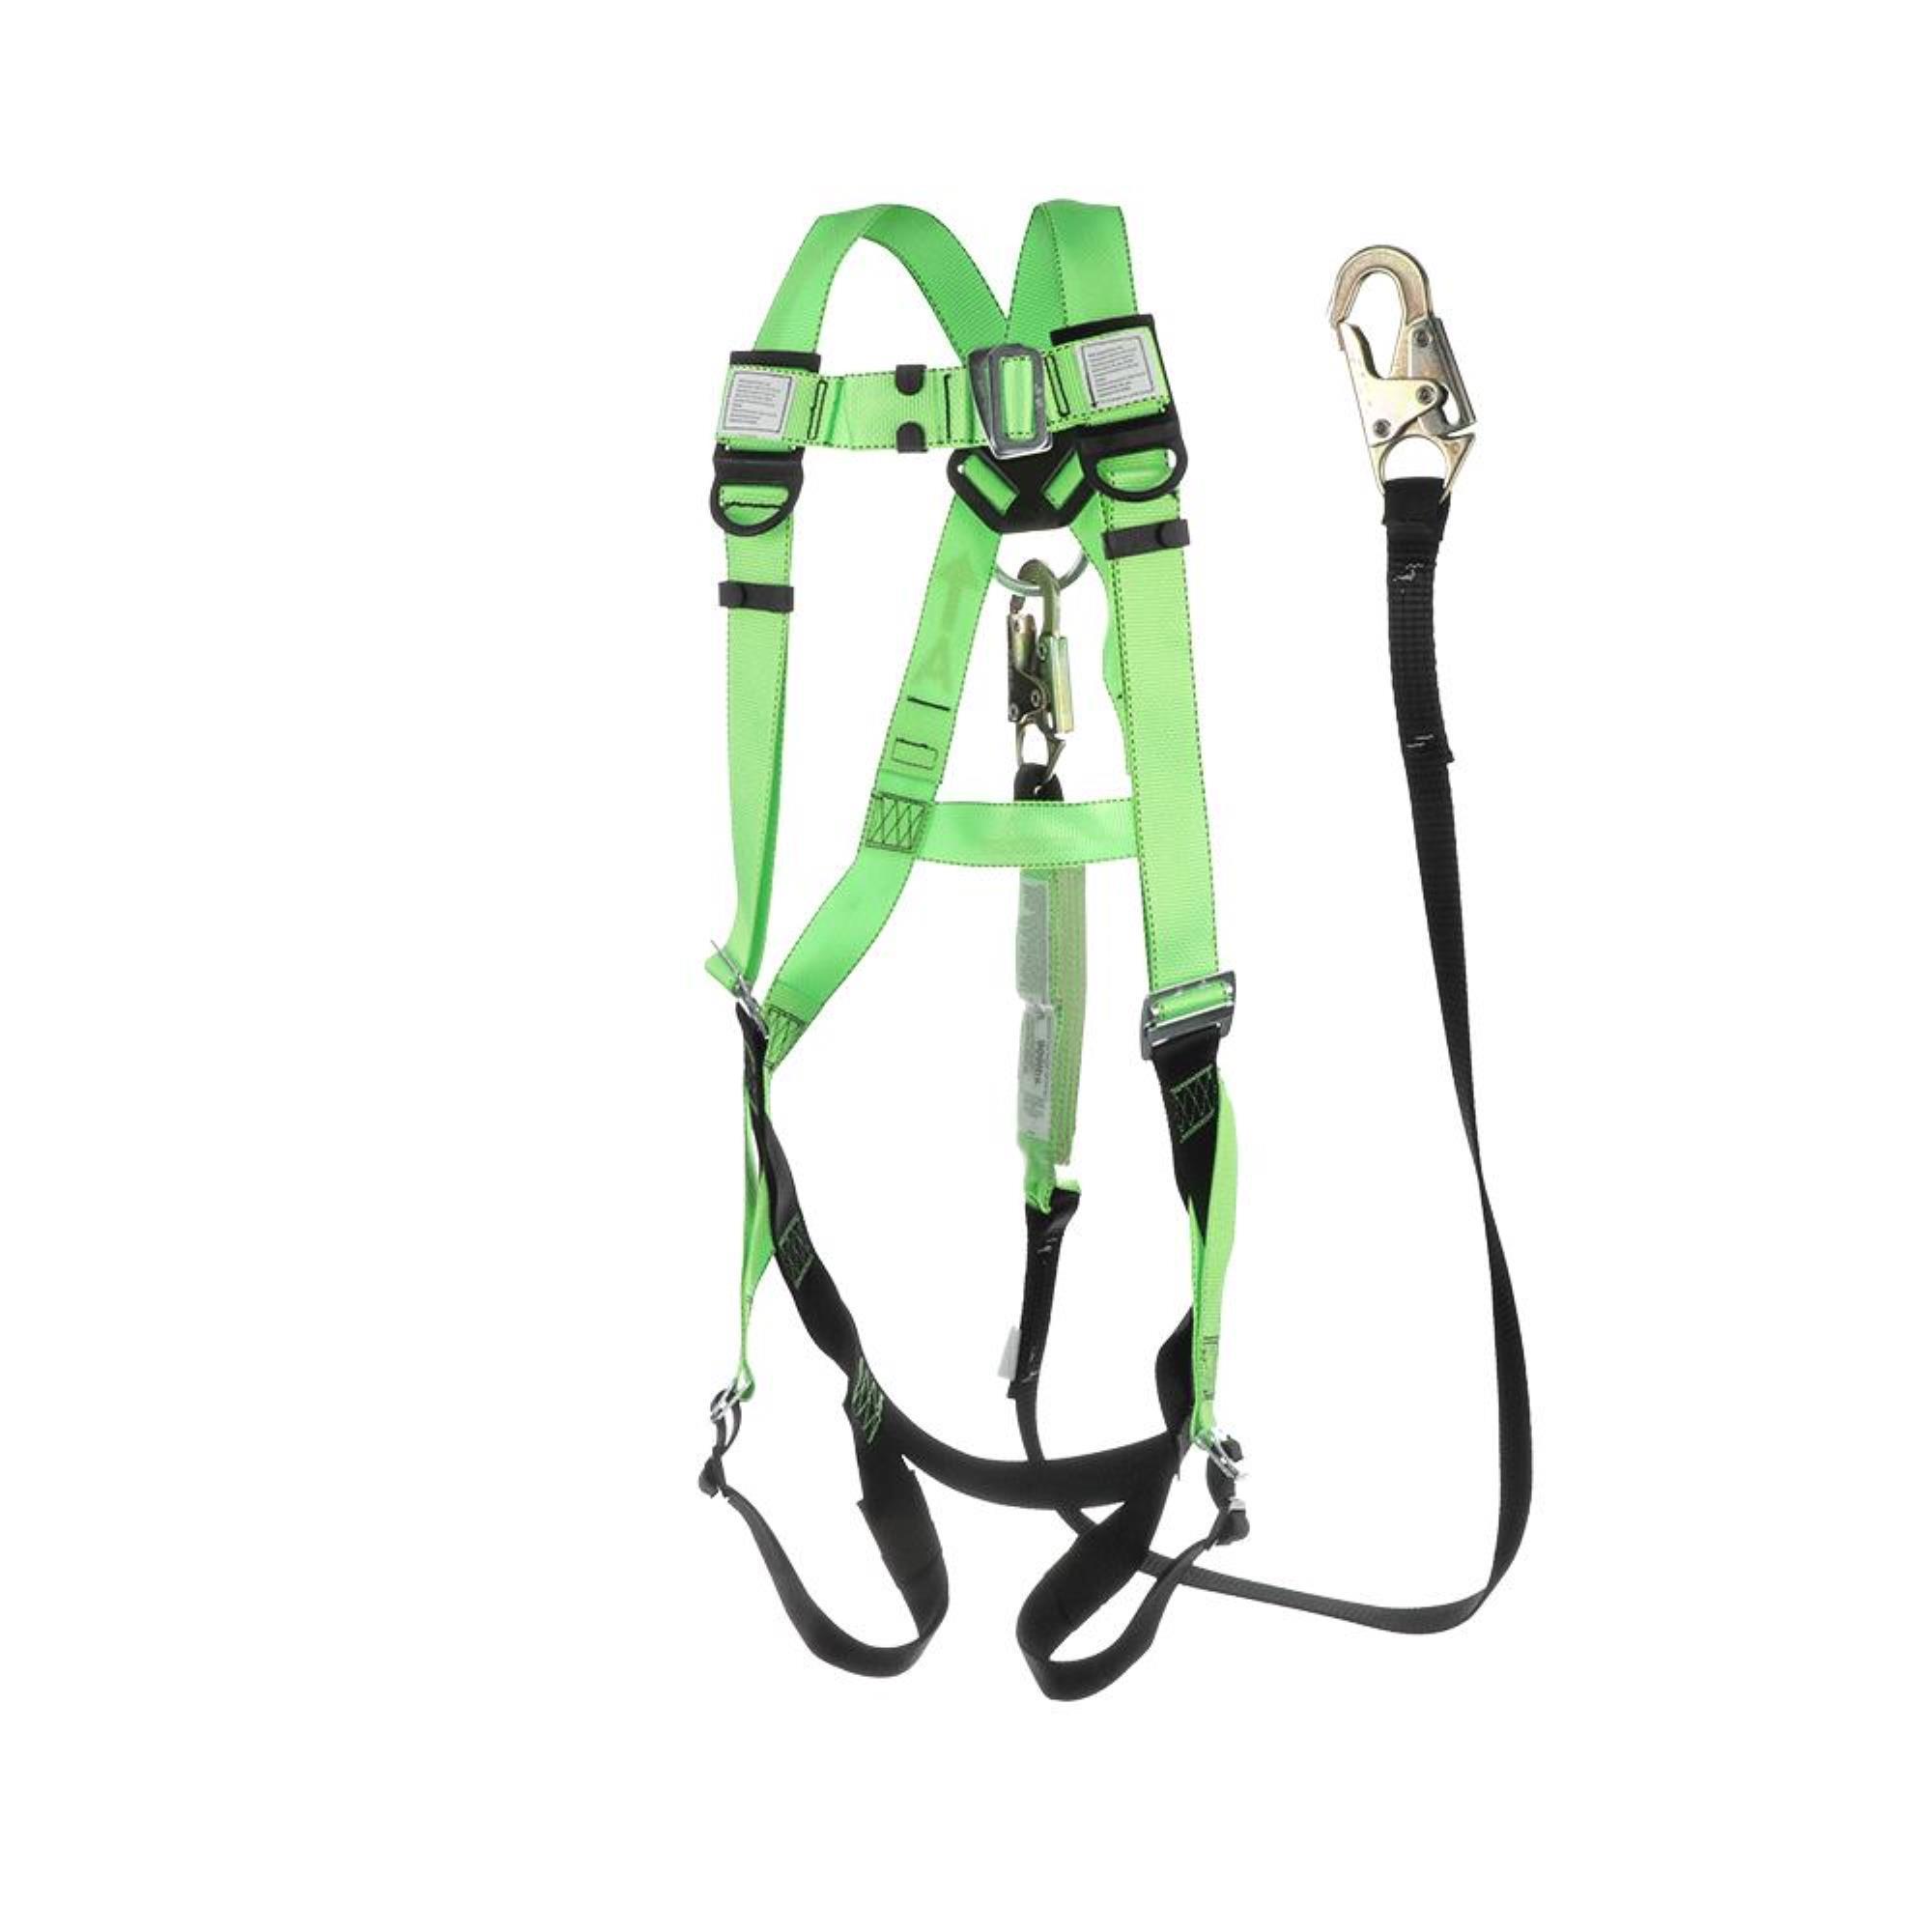 Peak Works, Contractor Kit: Harness, Lanyard, Weight Capacity 400 lb, Harness Size One Size, Model V8252356